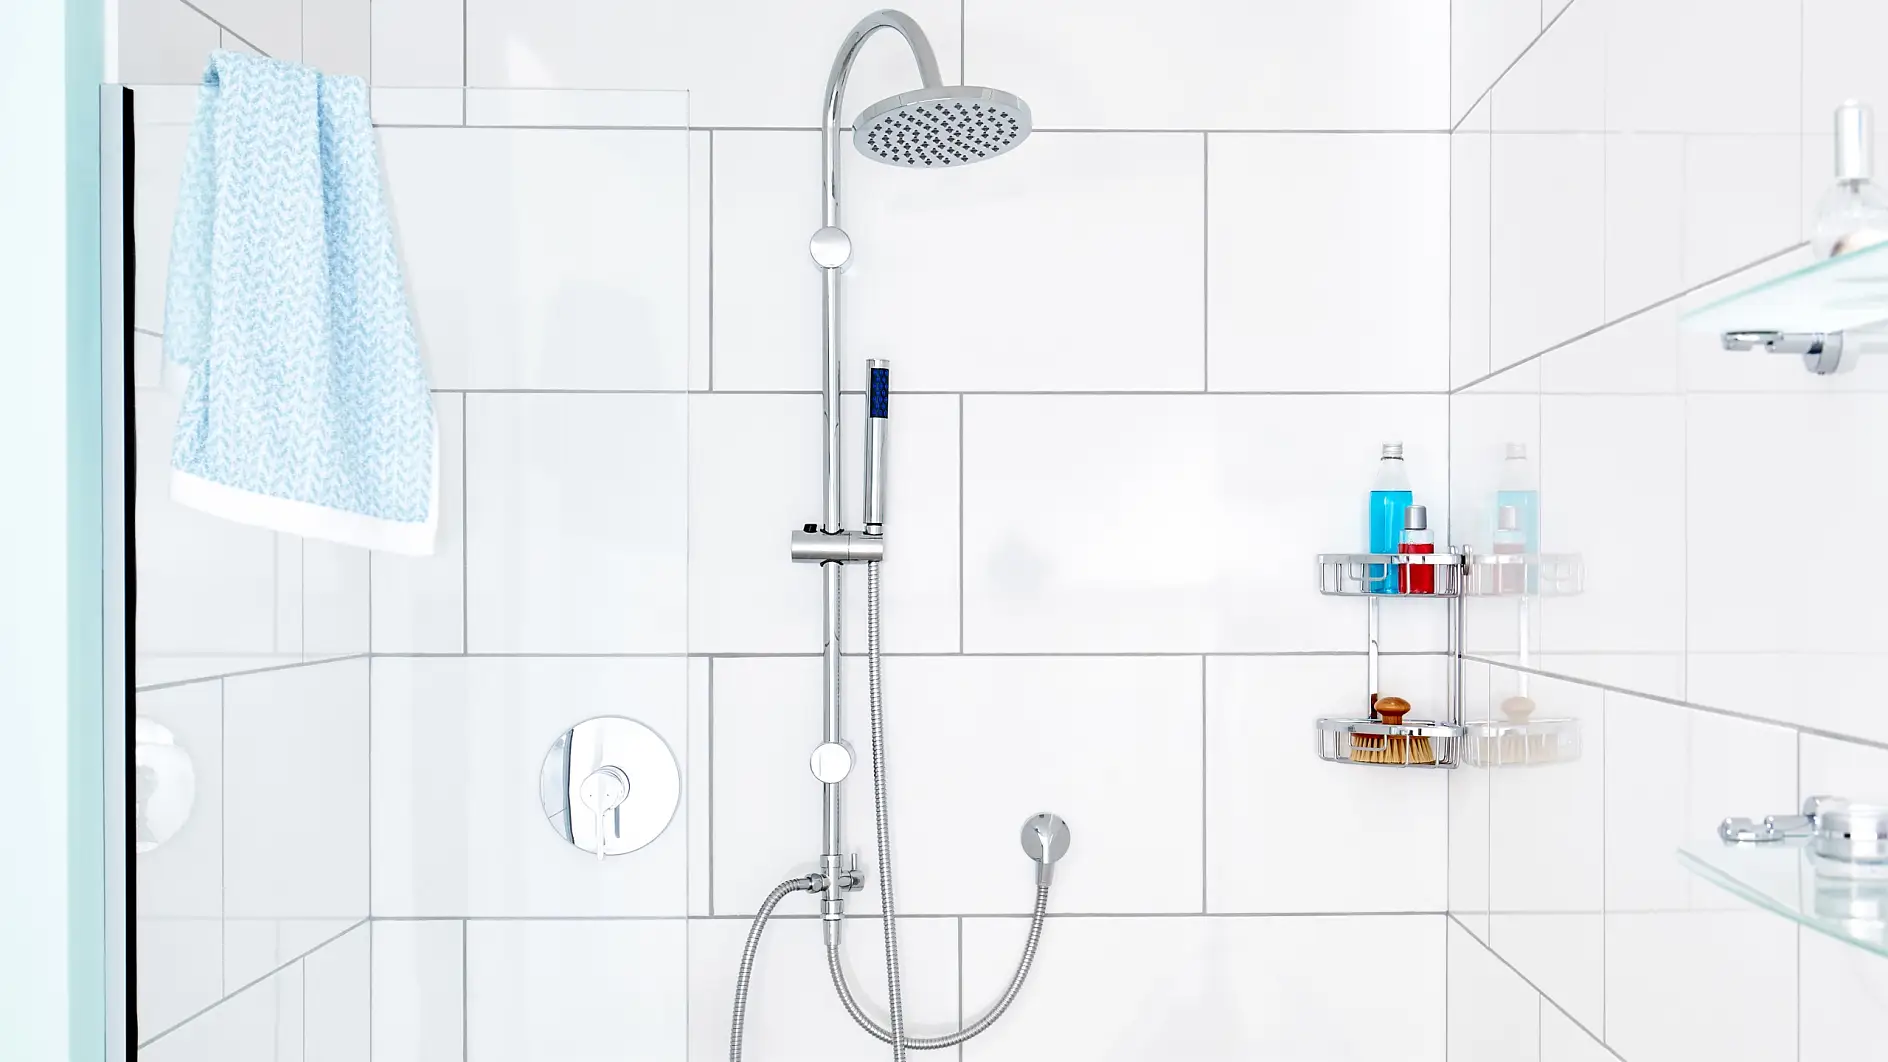 The center piece of your shower. Our minimalistic shower bar designs optimize your shower flow and experience.